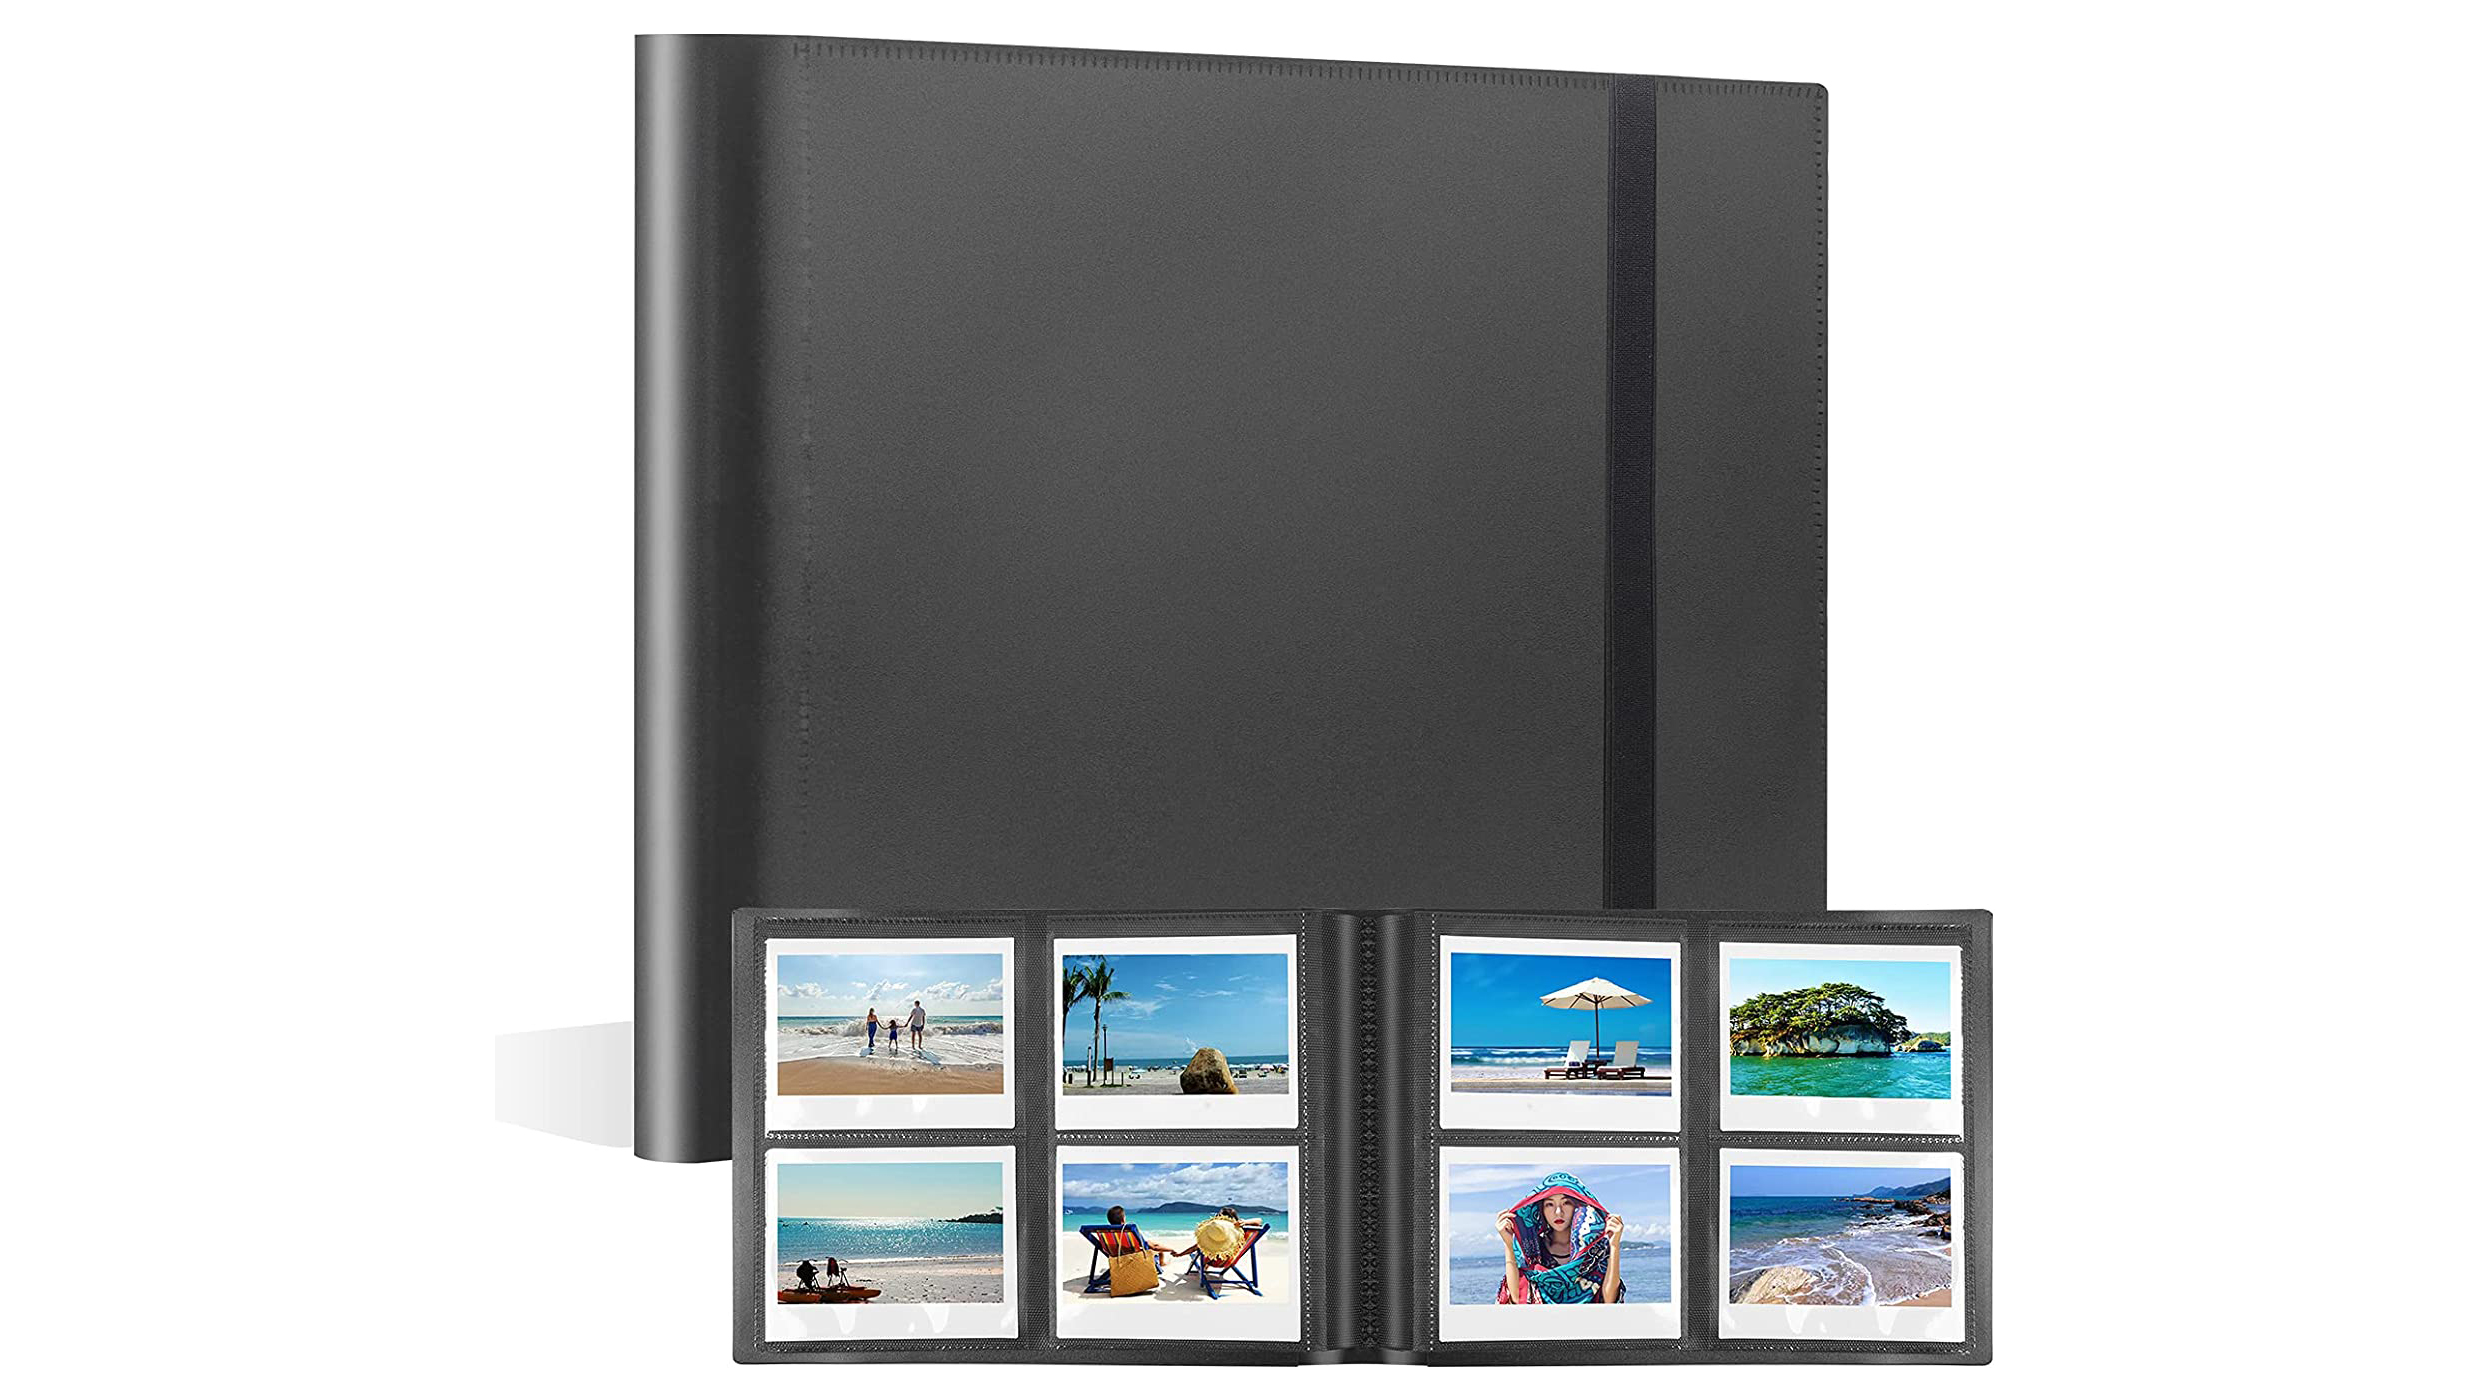 MochiThings: Instax Wide Photo Album